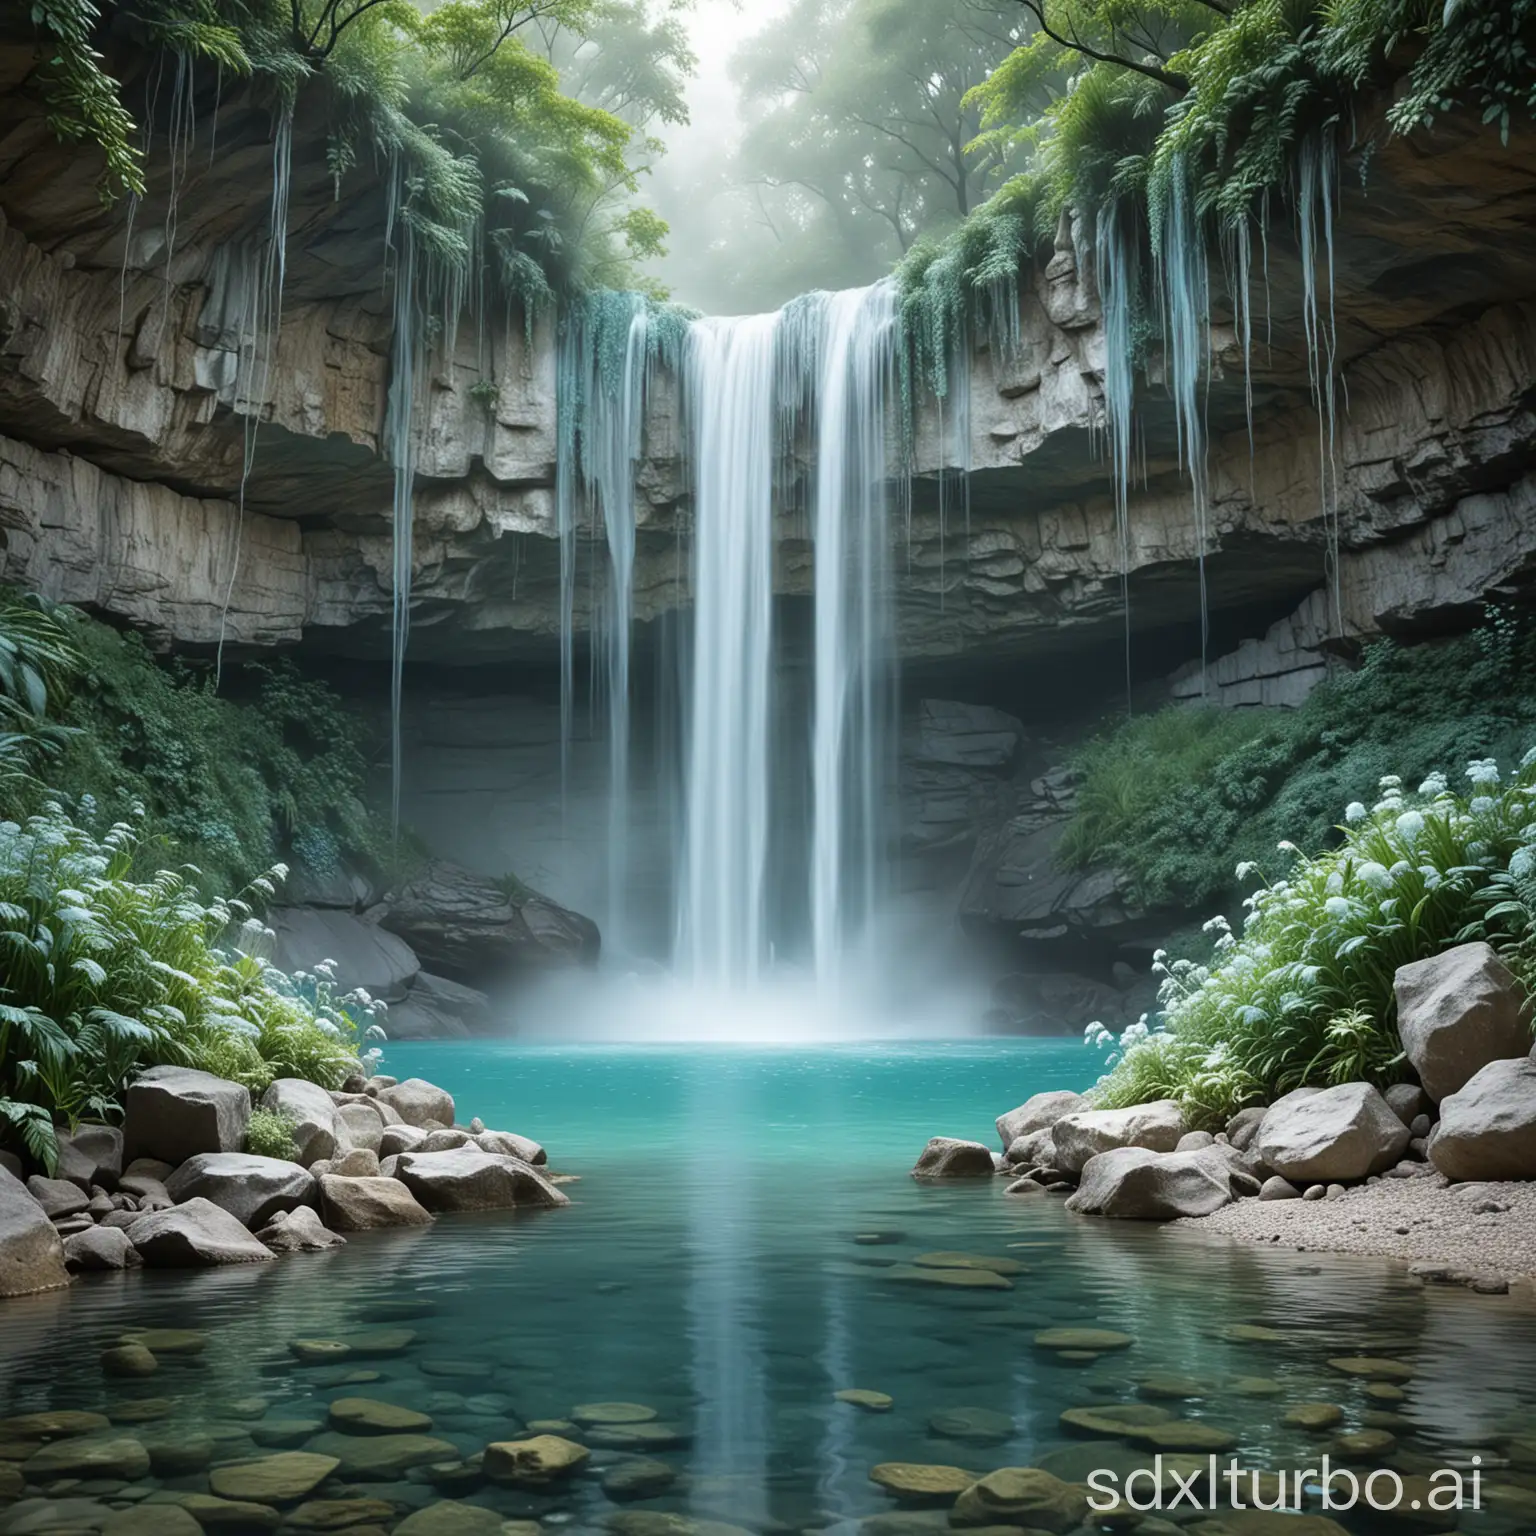 The majestic waterfall in luminescent landascape, gazing upon the aquamarine radiant, vibrant and sparay mist white glowing landscape, with the shimmering and sparkling elements casting a peaceful and calming aura.